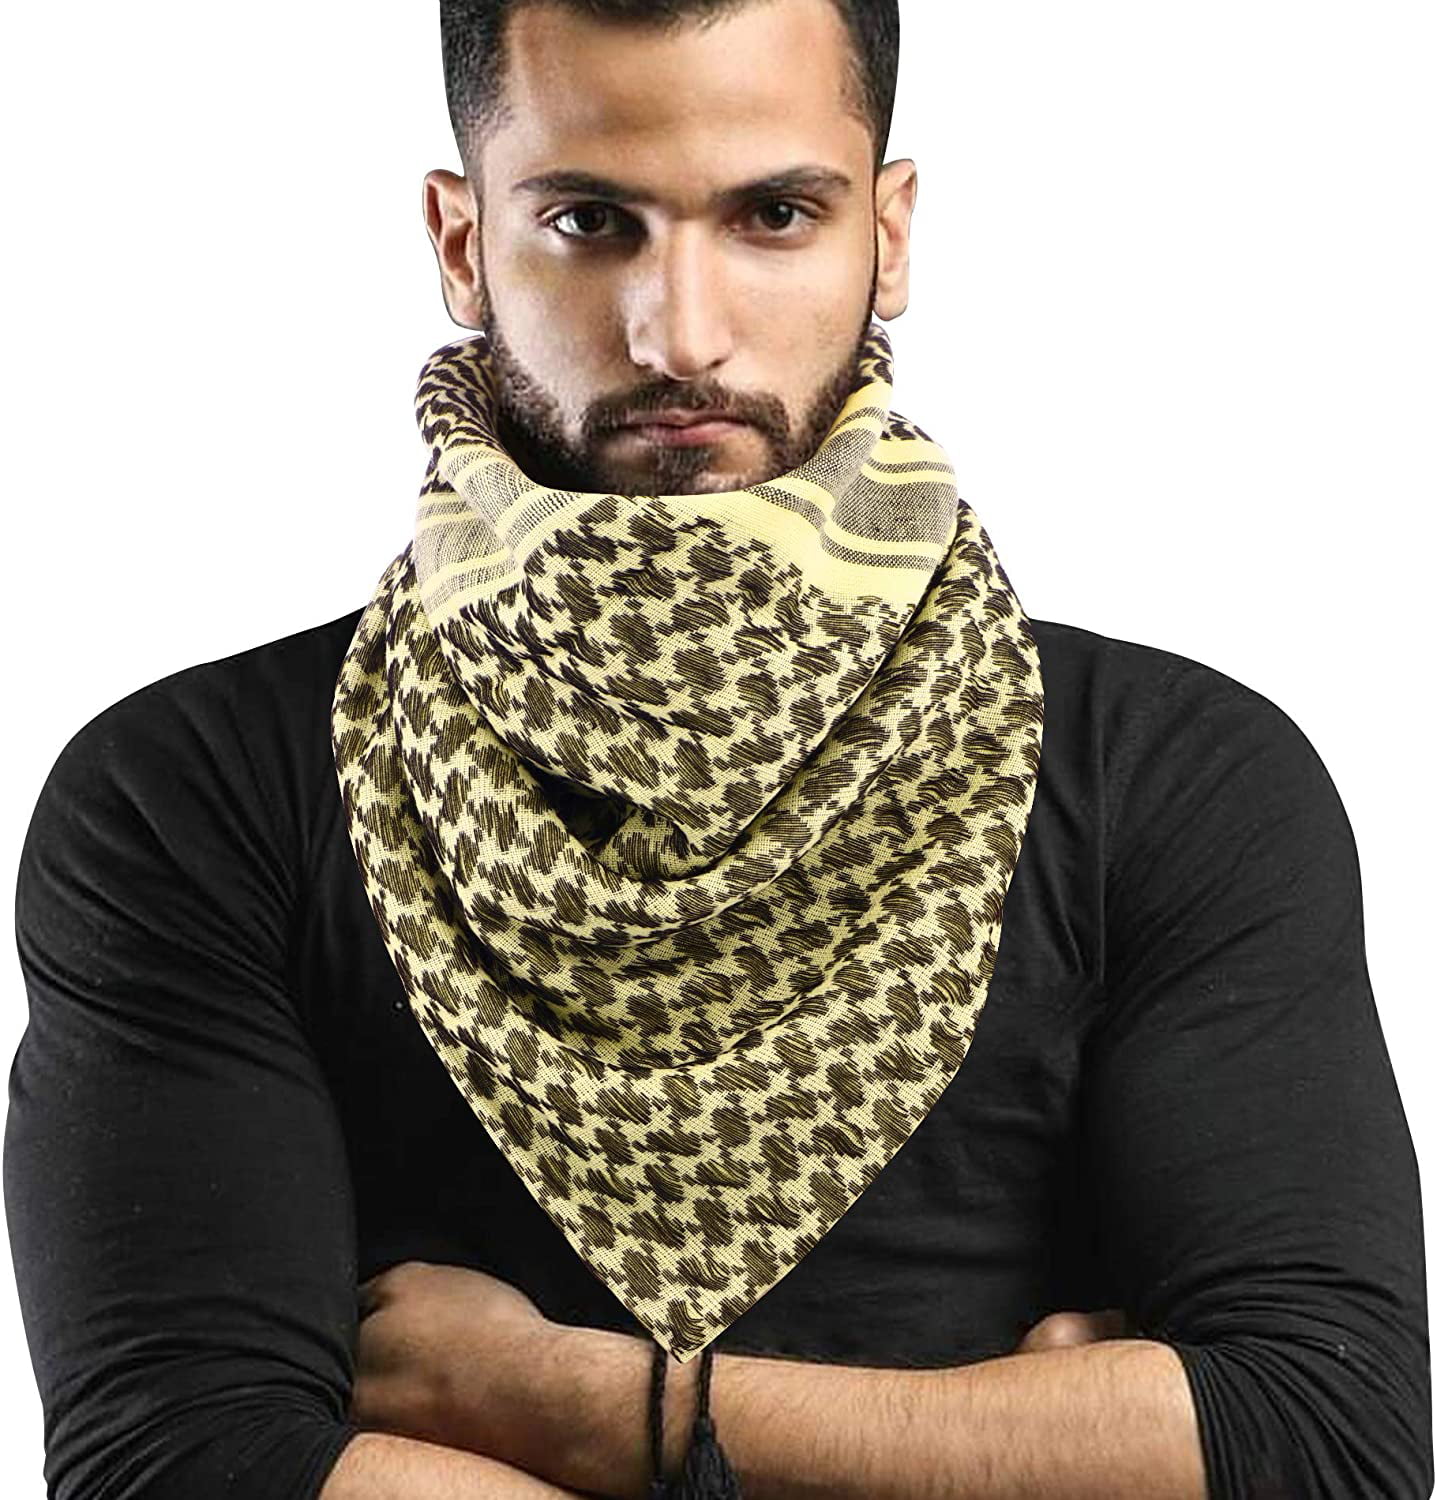 Shemagh tactical Scarf with Tassel Military Desert Keffiyeh Head Neck Scarf Arab Wrap 100% Cotton 